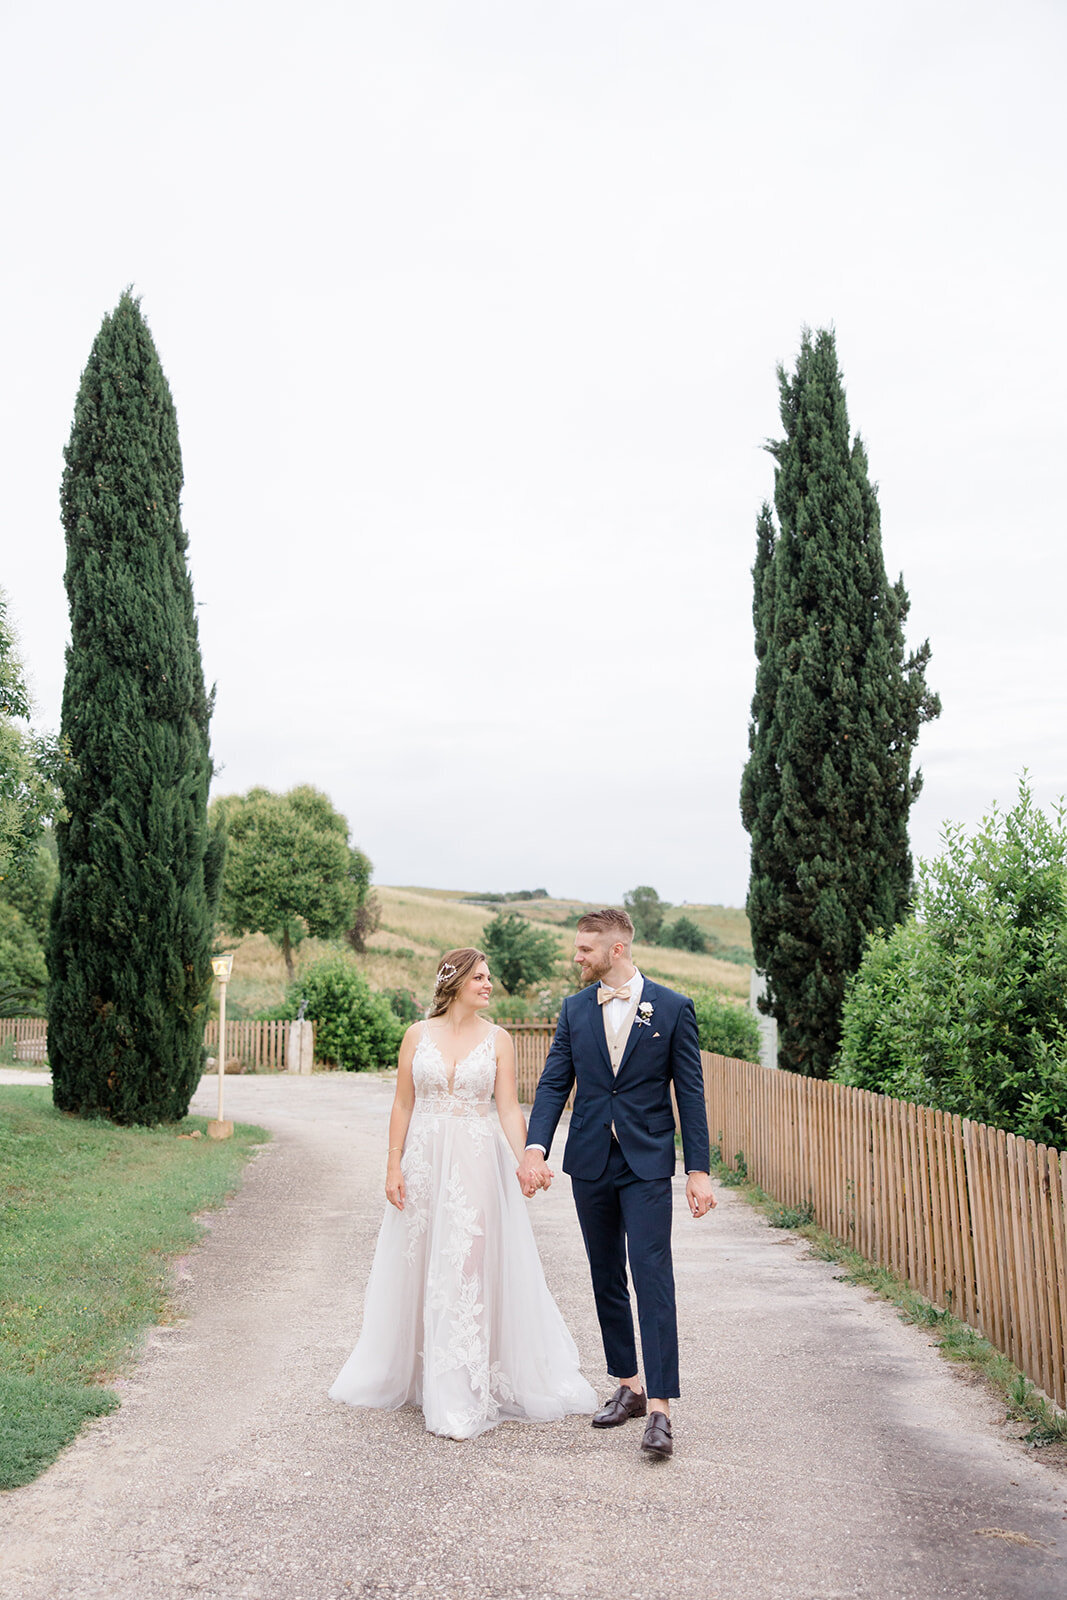 Rome_Italy_Wedding_BrittanyNavinPhotography-789